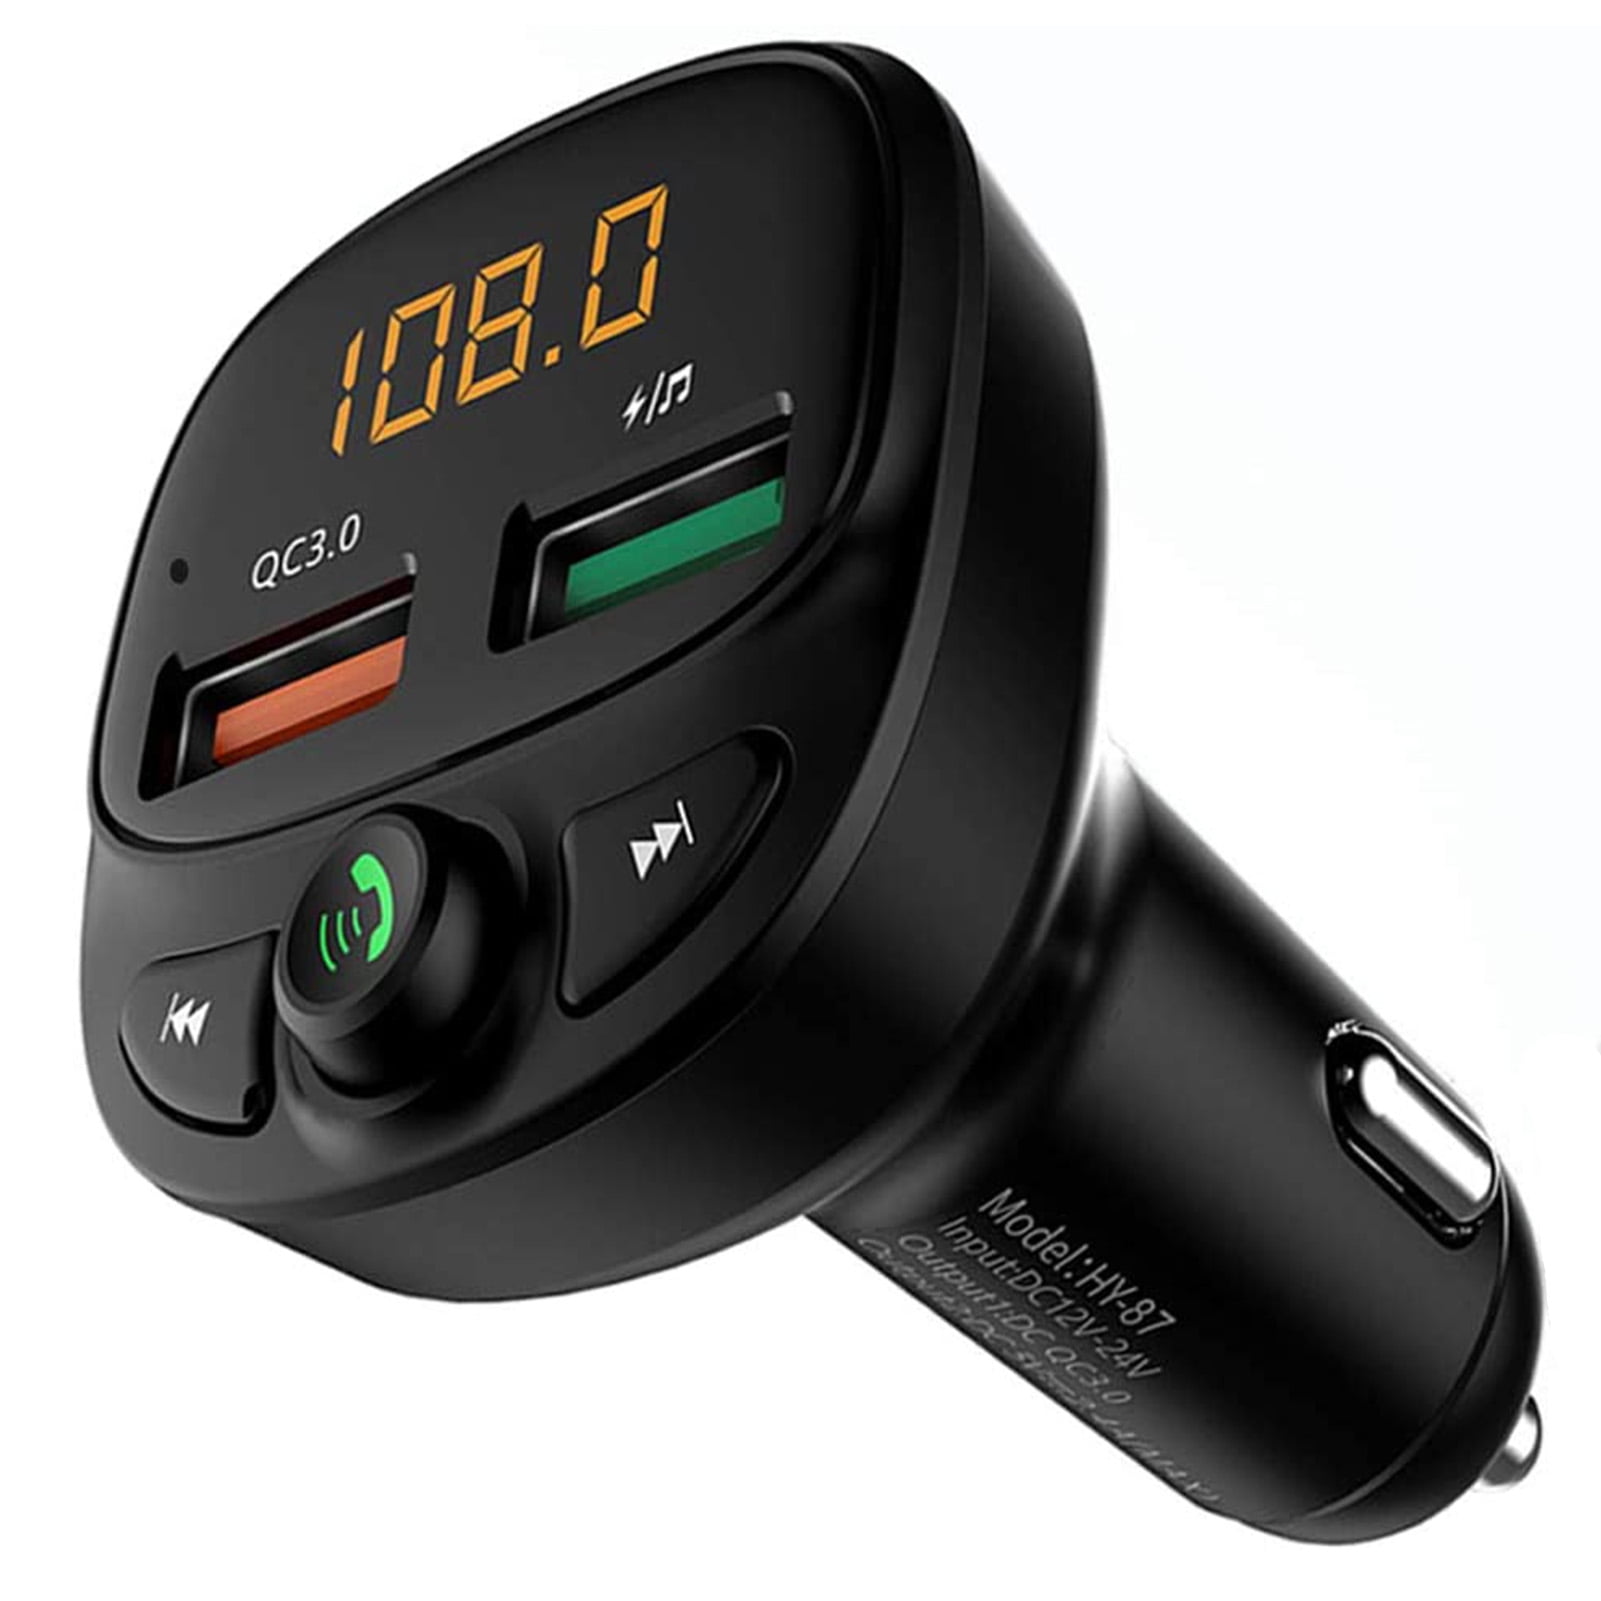 Bluetooth FM Transmitter for Car Car USB Charger QC3.0 Wireless in-Car FM Radio Transmitter Adapter with Hand-Free Calling Music Player Support TF Card and USB Flash Drive 